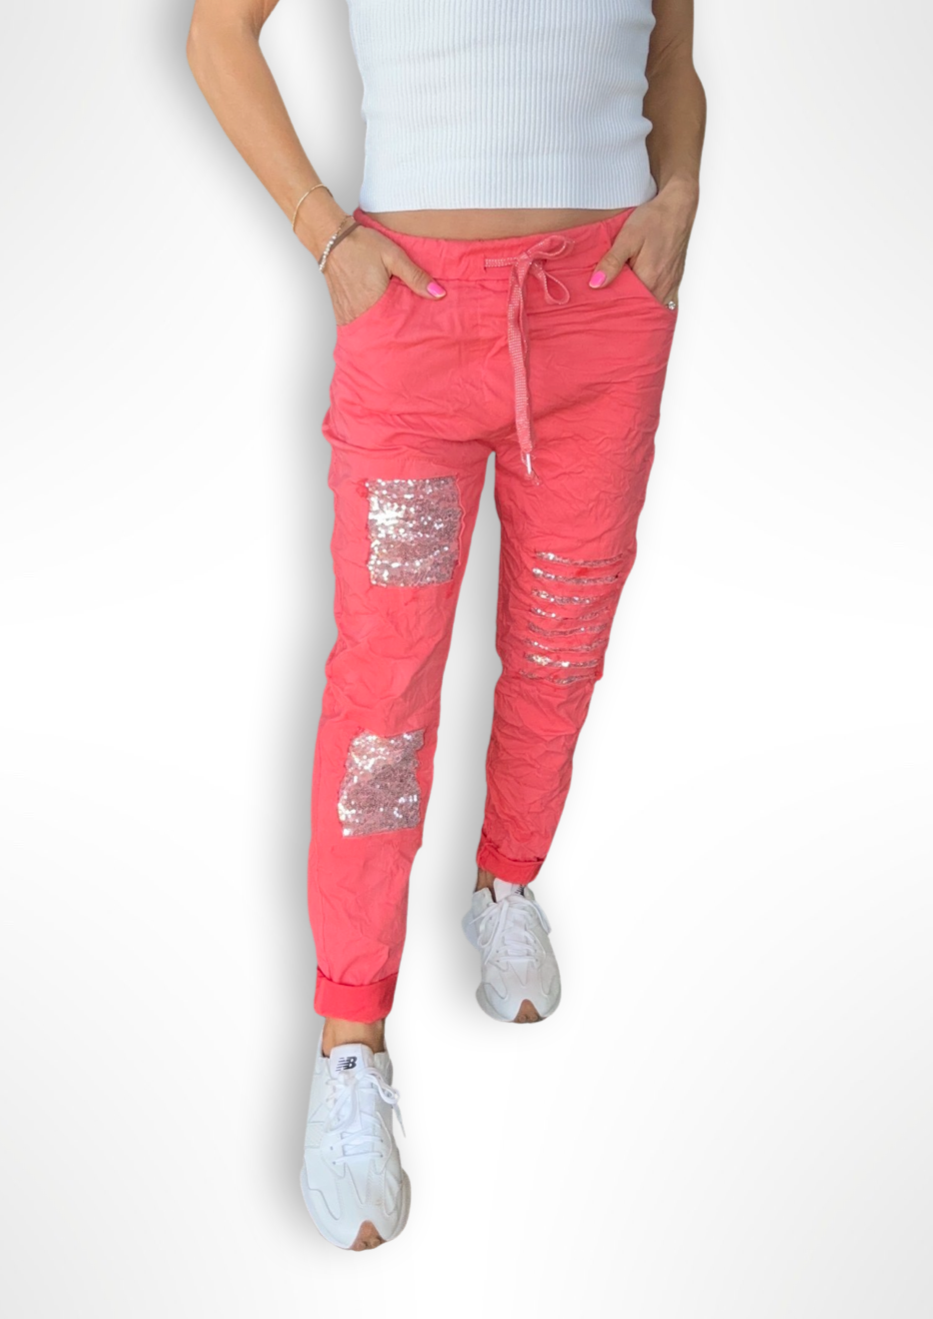 Milanese Sequin Pant - Coral, by Amici Our Milanese Sequin Pant are the perfect pant to get into that happy spring vibe! With a blend of viscose and stretch material for superior comfort, these hip joggers feature sequin detailing  and drawstring waist. Stand out in style for your weekend ahead with these fabulous joggers!